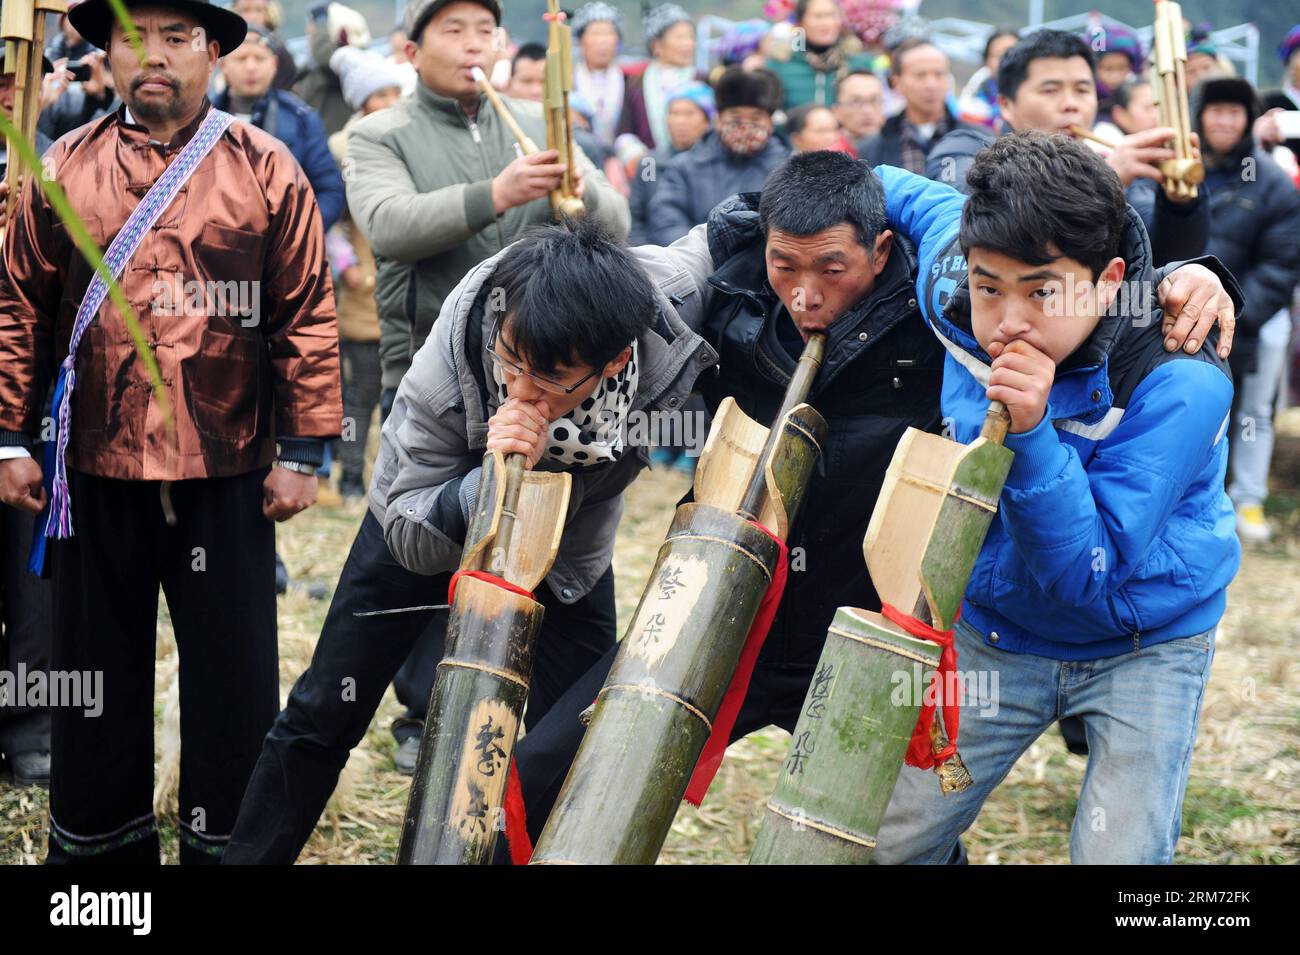 (140211) -- RONGSHUI, Feb. 10, 2014 (Xinhua) -- Villagers blow reed-pipe wind instrument at the Pohui , a big party event participated by local people to celebrate Chinese lunar new year, in Yuanbao Village of Antai Township, Rongshui Miao Autonomous County, south China s Guangxi Zhuang Autonomous Region, Feb. 10, 2014. The Pohui , which has a history of more than 100 years, is annually held from the first day to the 17th day of the first month on the Chinese lunar calendar. (Xinhua/Li Bin) (lfj) CHINA-GUANGXI-RONGSHUI-MIAO ETHNIC GROUP-CELEBRATIONS (CN) PUBLICATIONxNOTxINxCHN   Rongshui Feb 1 Stock Photo